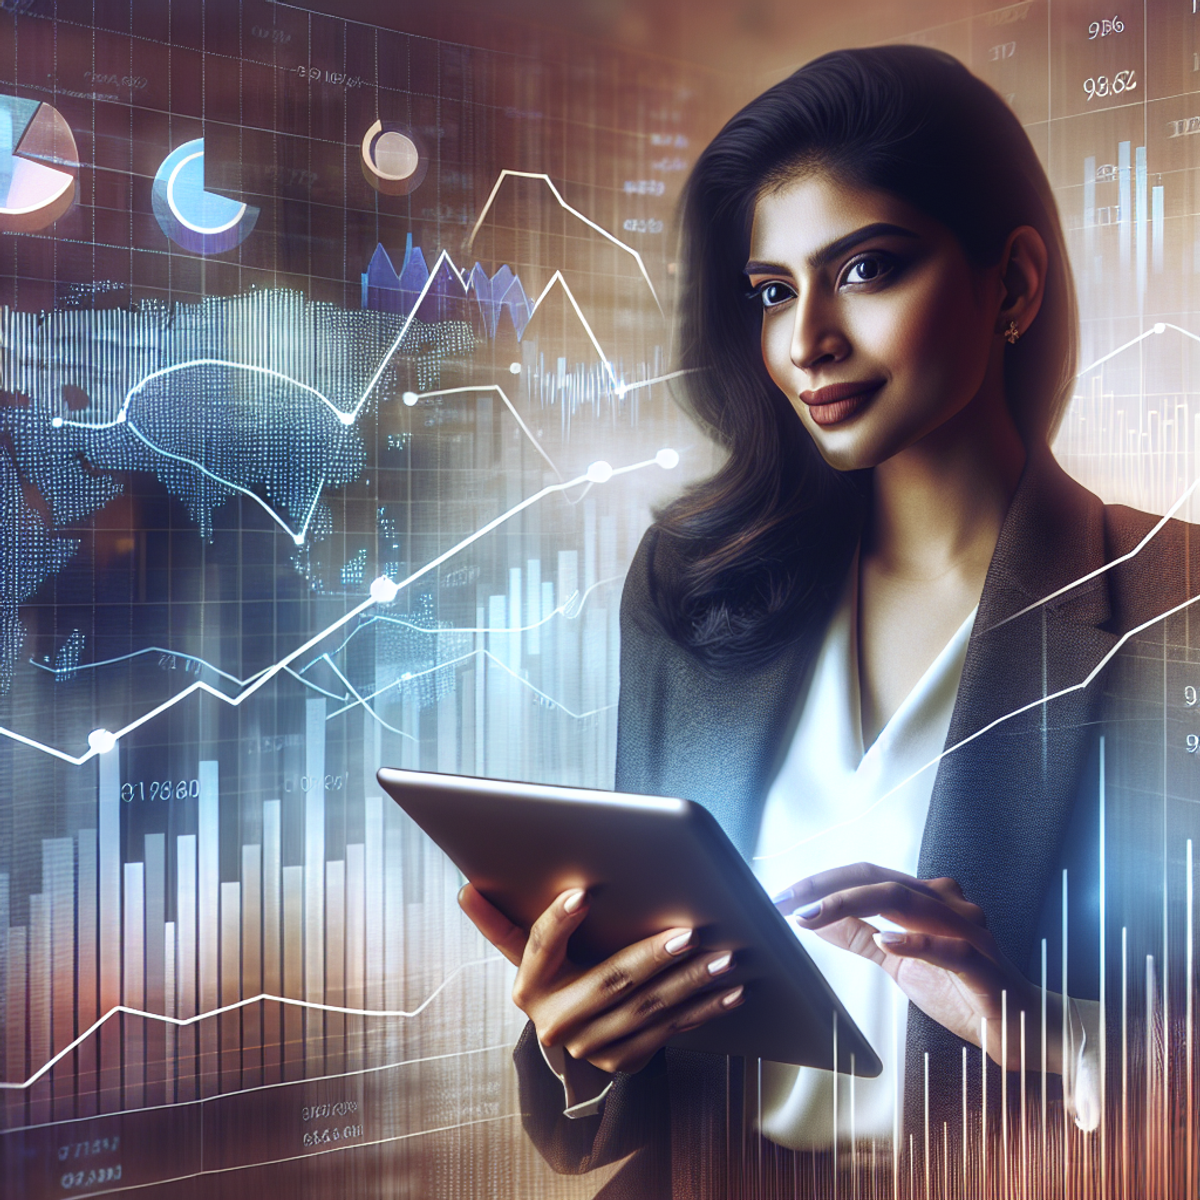 A South Asian woman confidently holding a digital tablet surrounded by abstract financial charts and graphs.